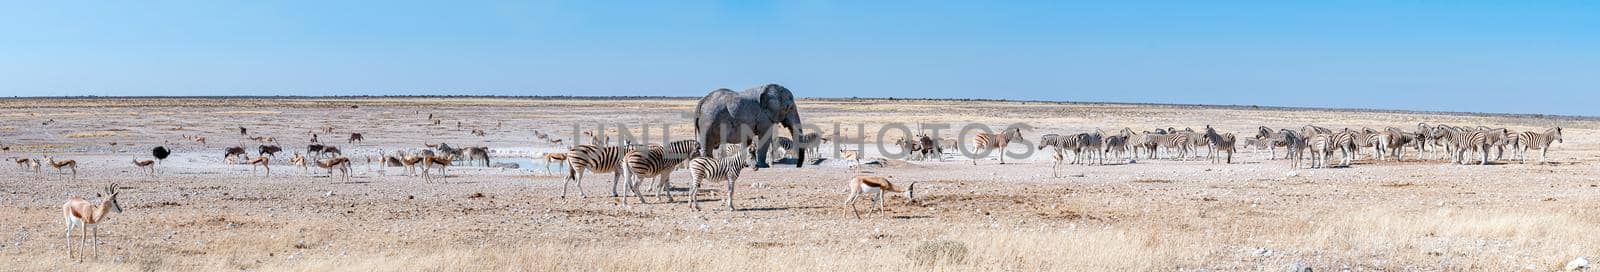 Panorama of african elephant drinking water at the Nebrownii waterhole by dpreezg